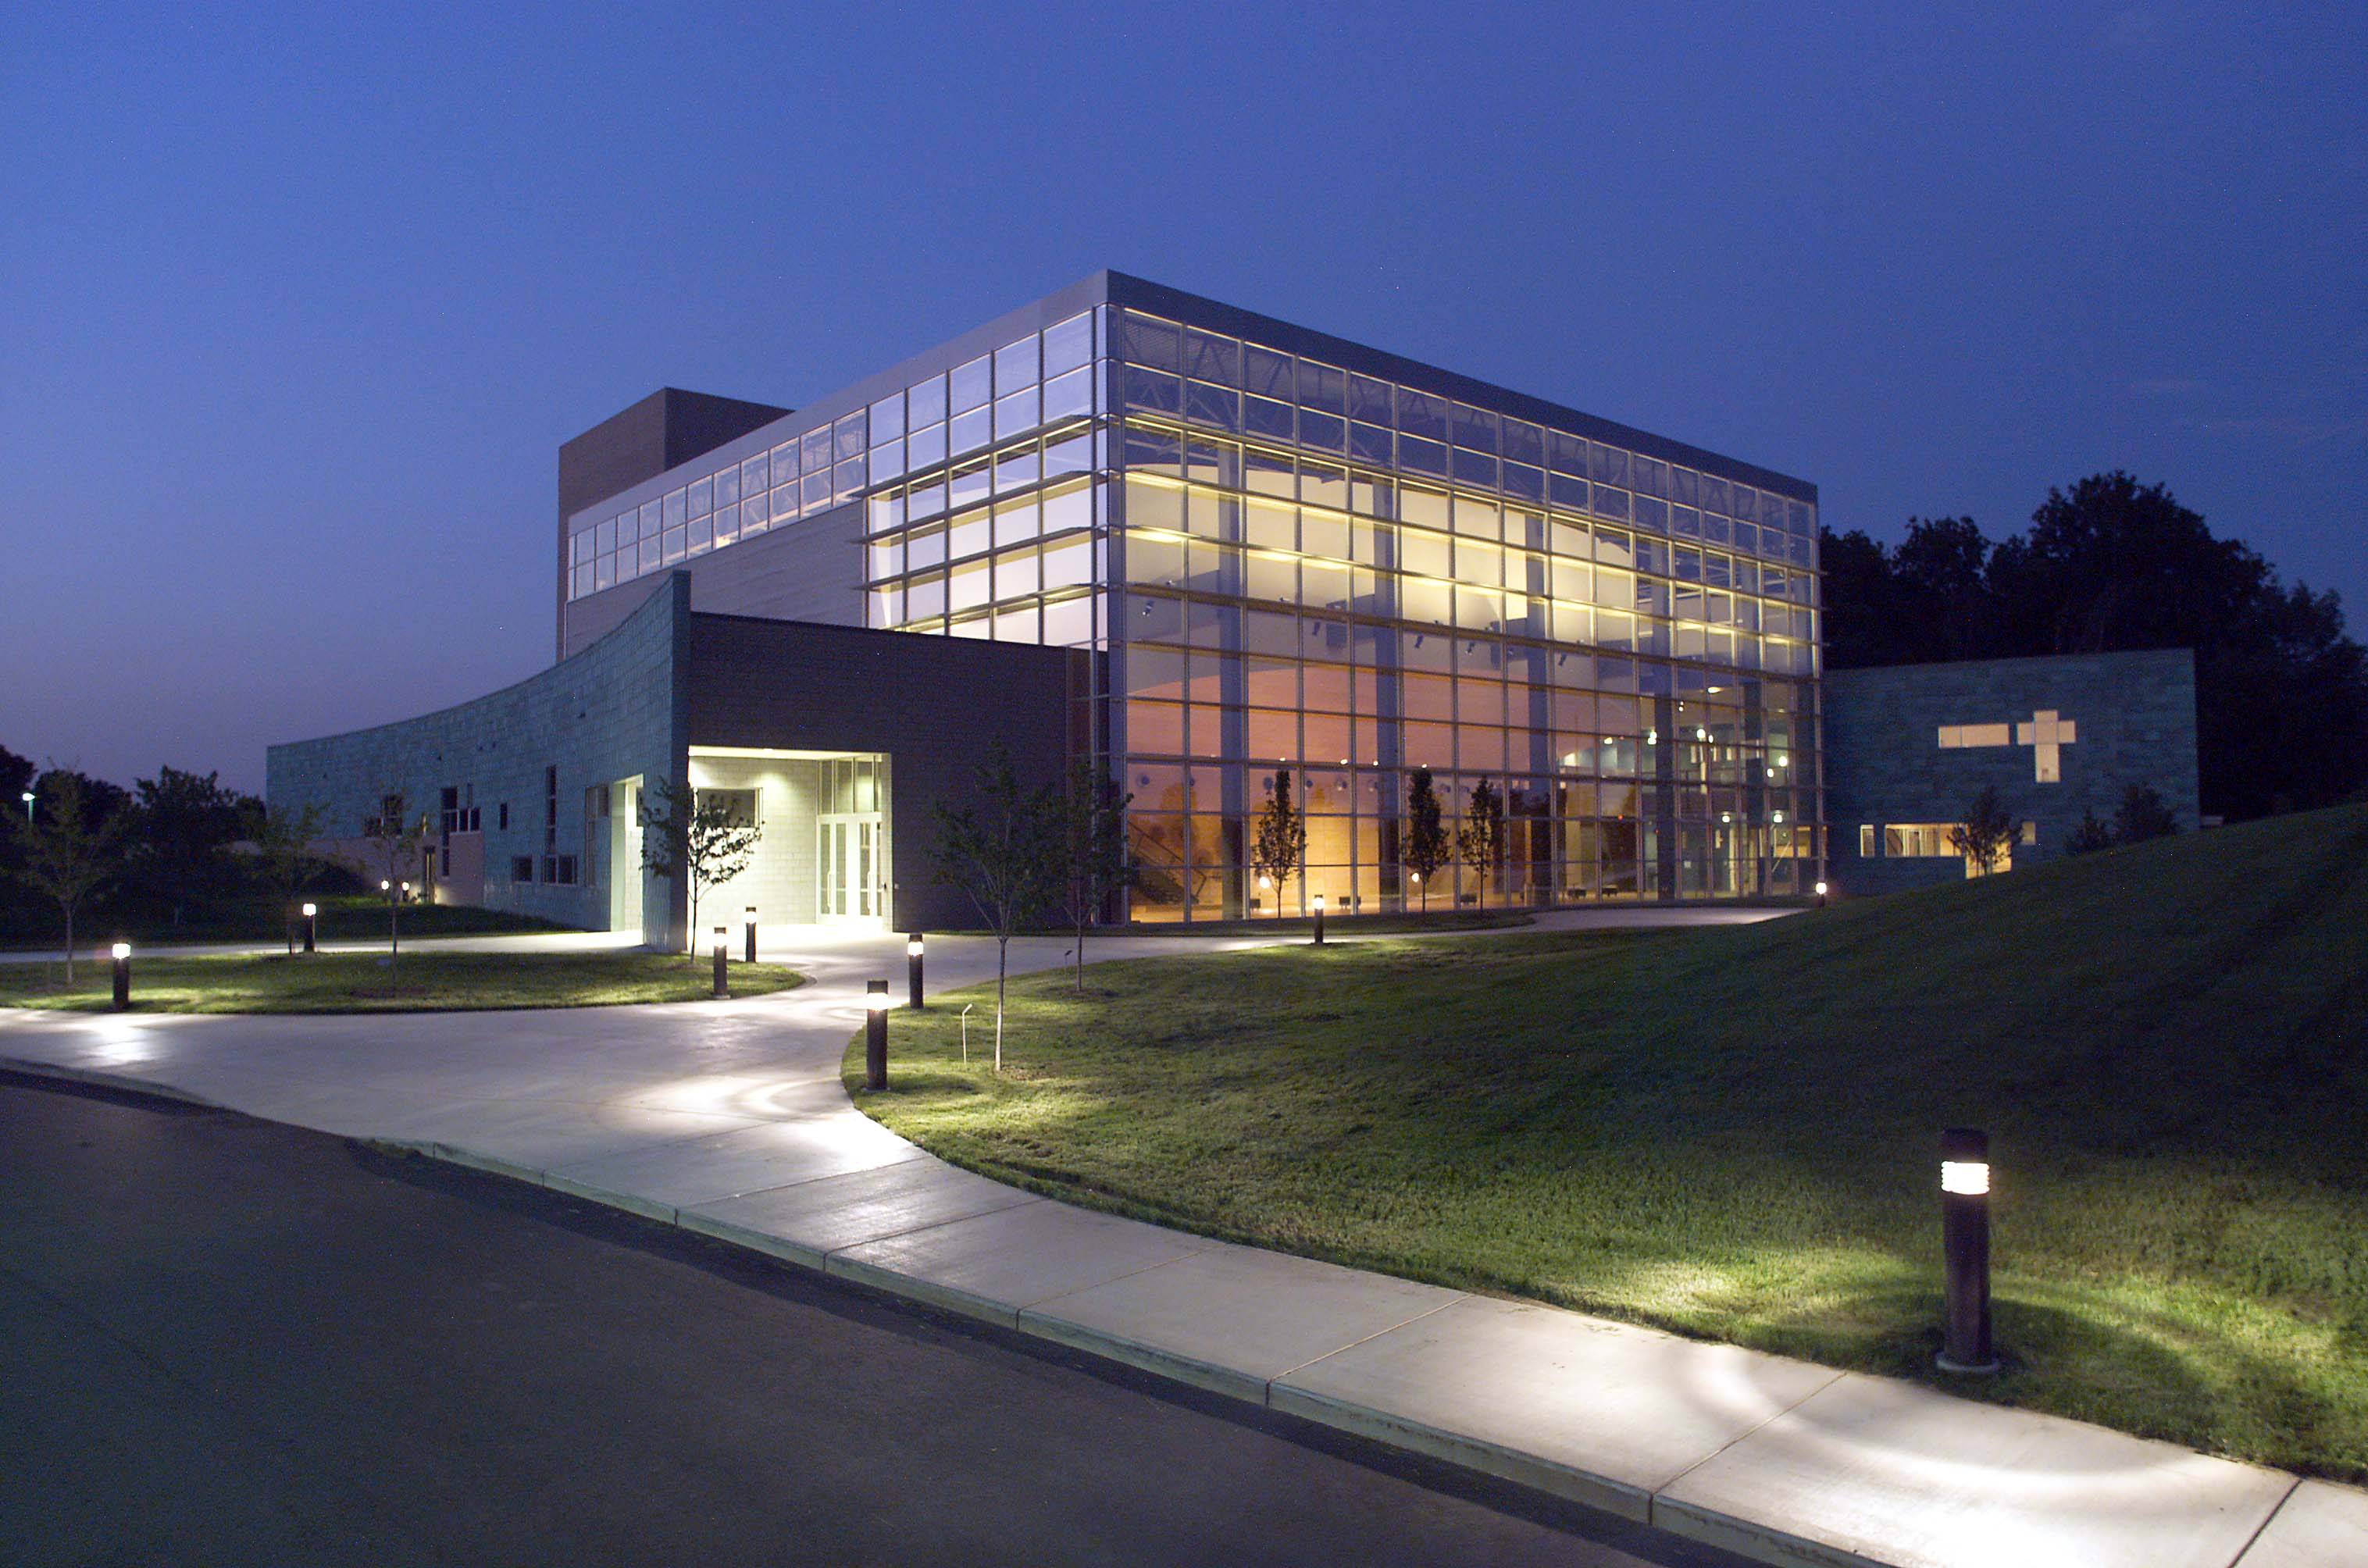 photo of the fine arts center building at night showing the internal lighting features